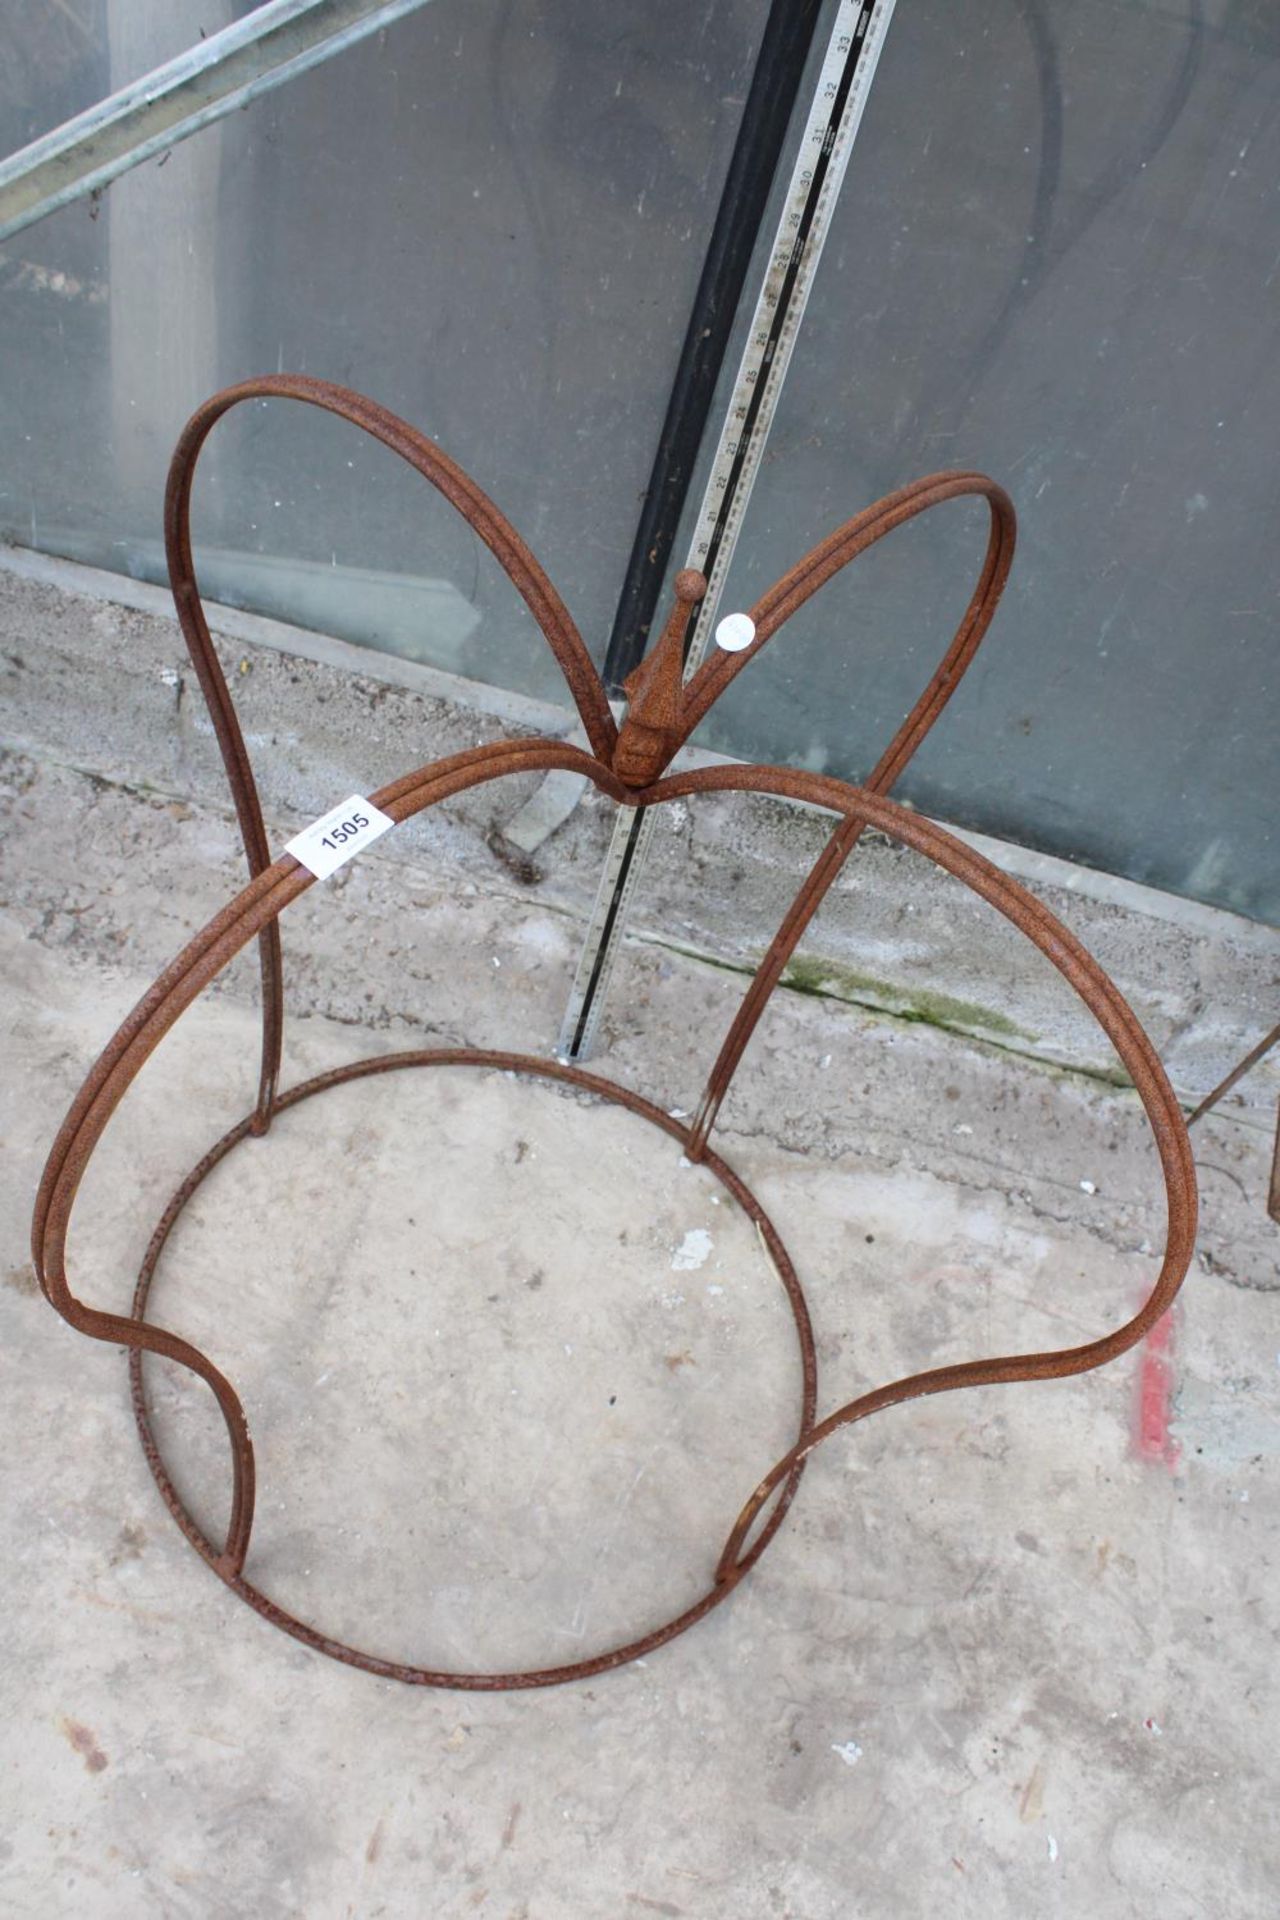 A STEEL GARDEN PLANT STAND IN THE SHAPE OF A CROWN (H:76CM W:68CM) - Image 2 of 3